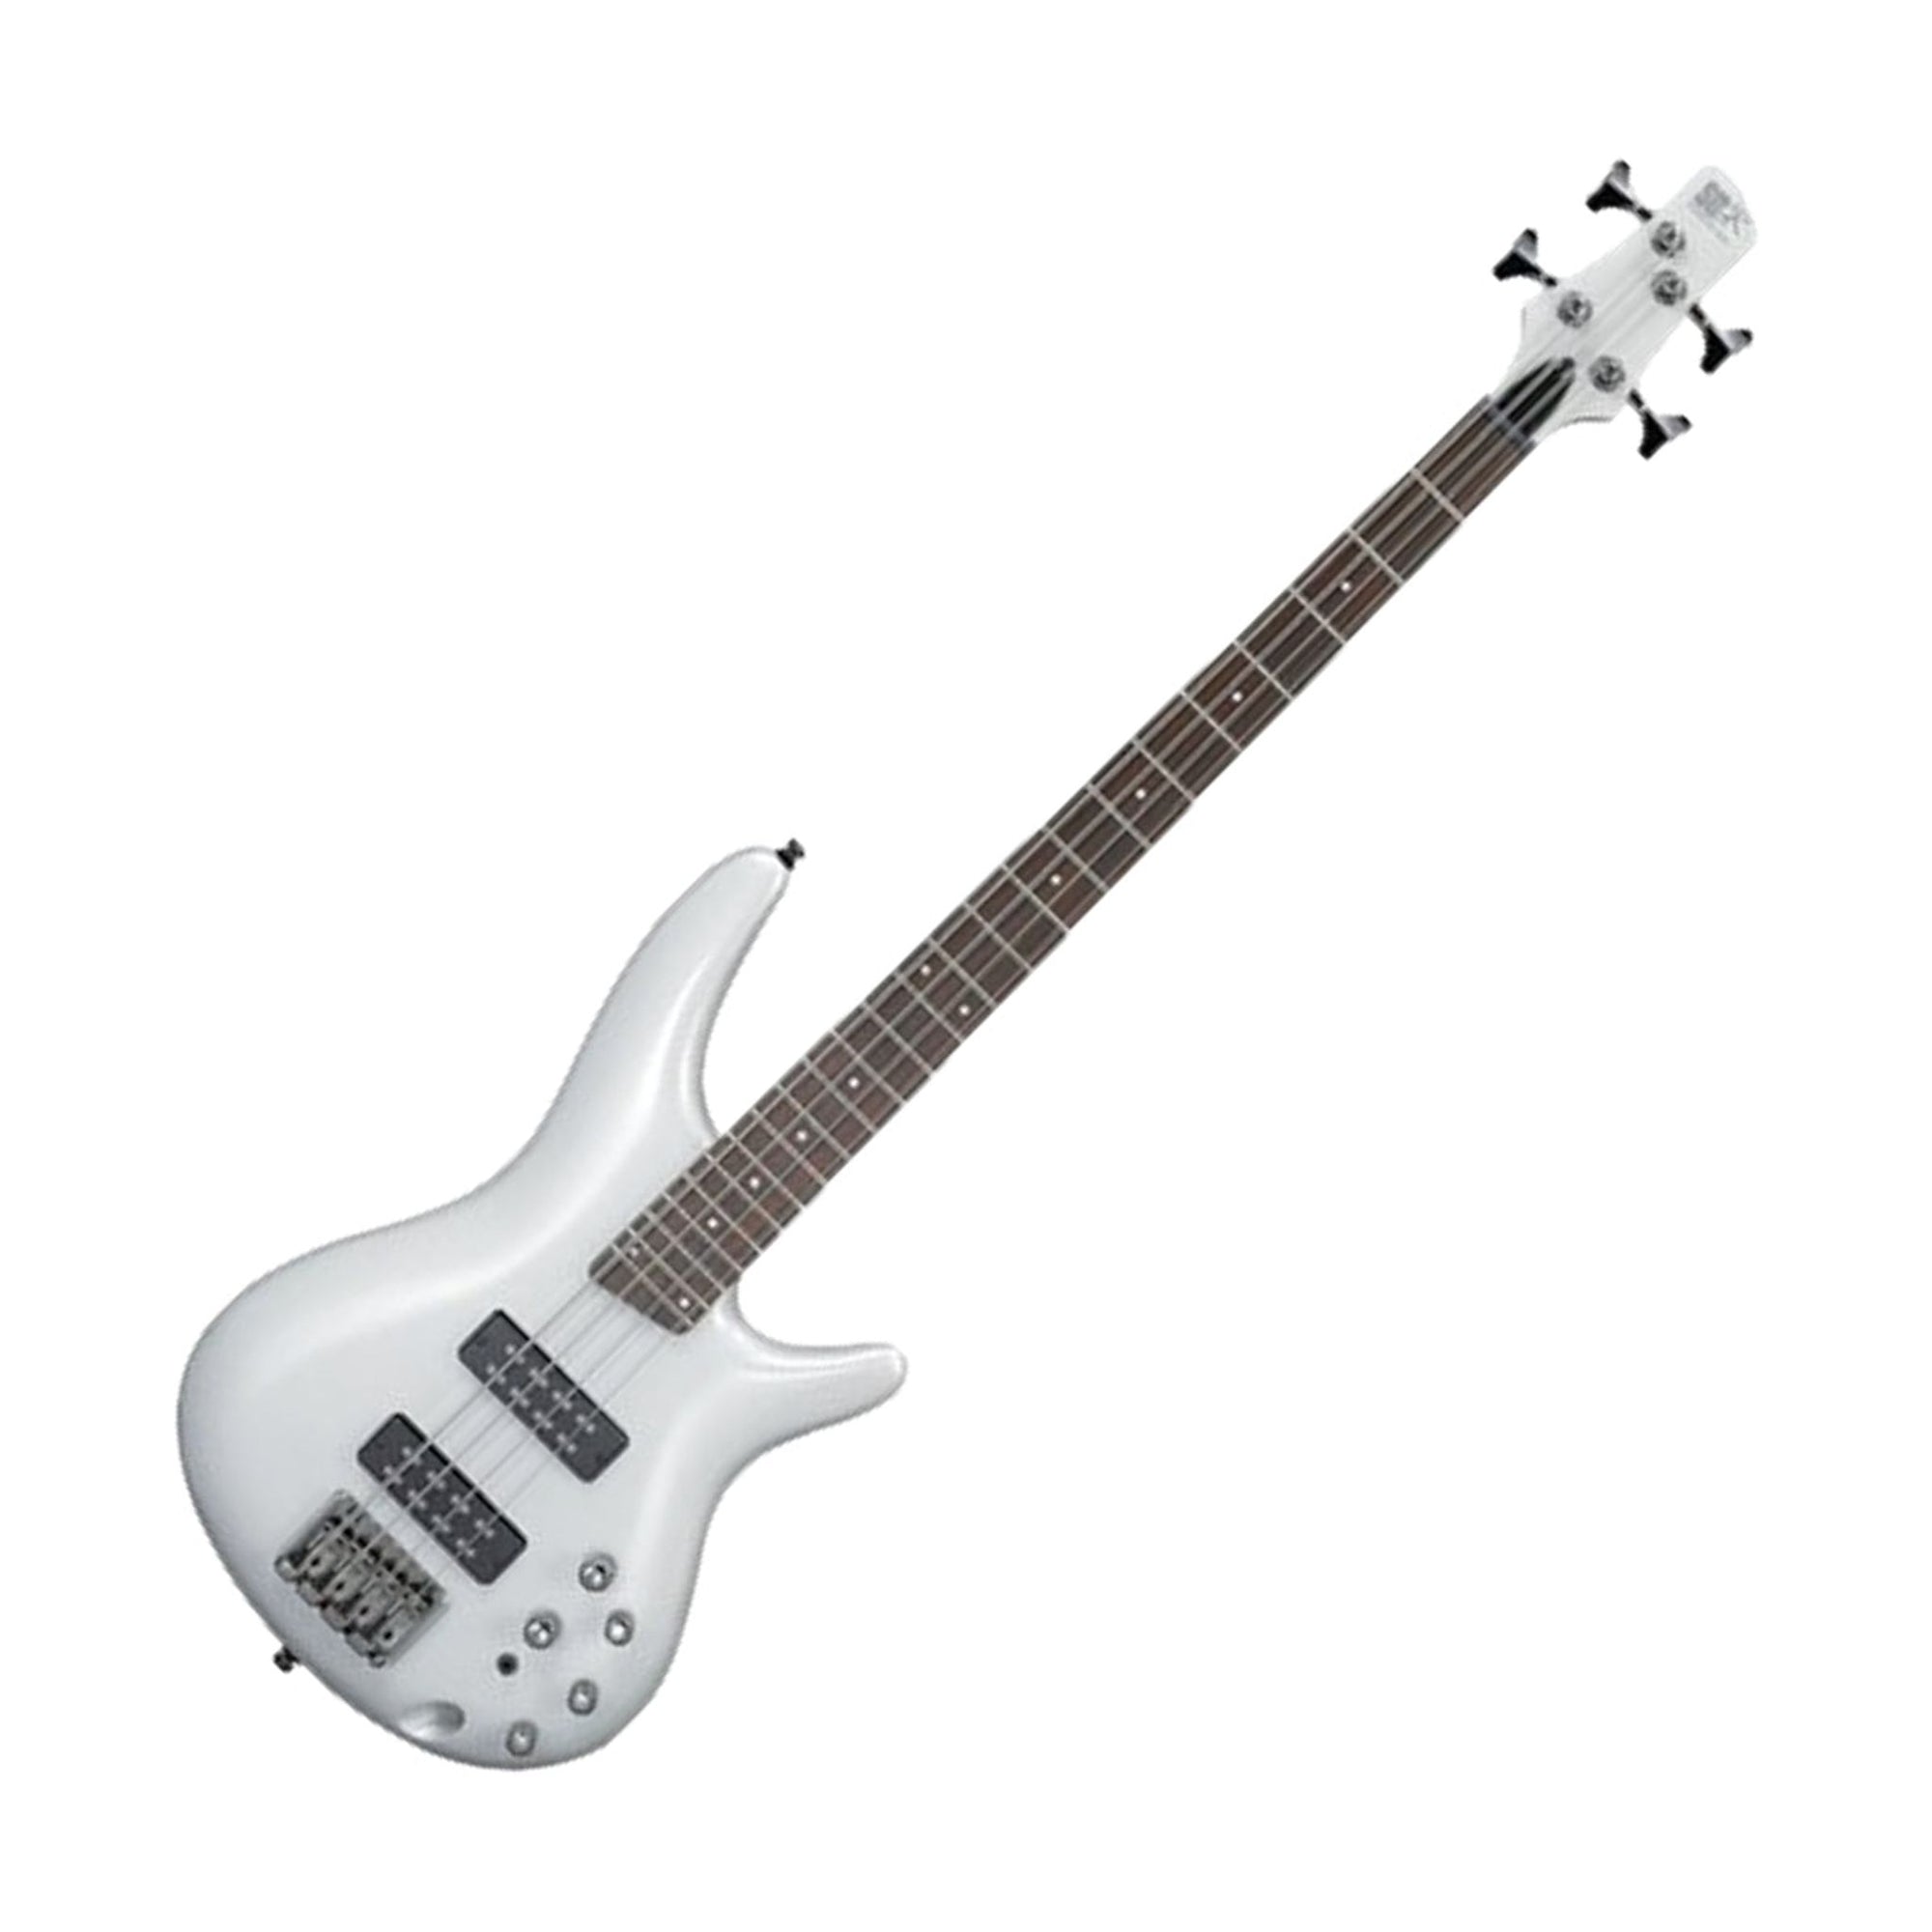 The Ibanez SR300E PW Bass Guitar continues to excite with its smooth, fast neck, lightweight body, and perfectly matched electronics.